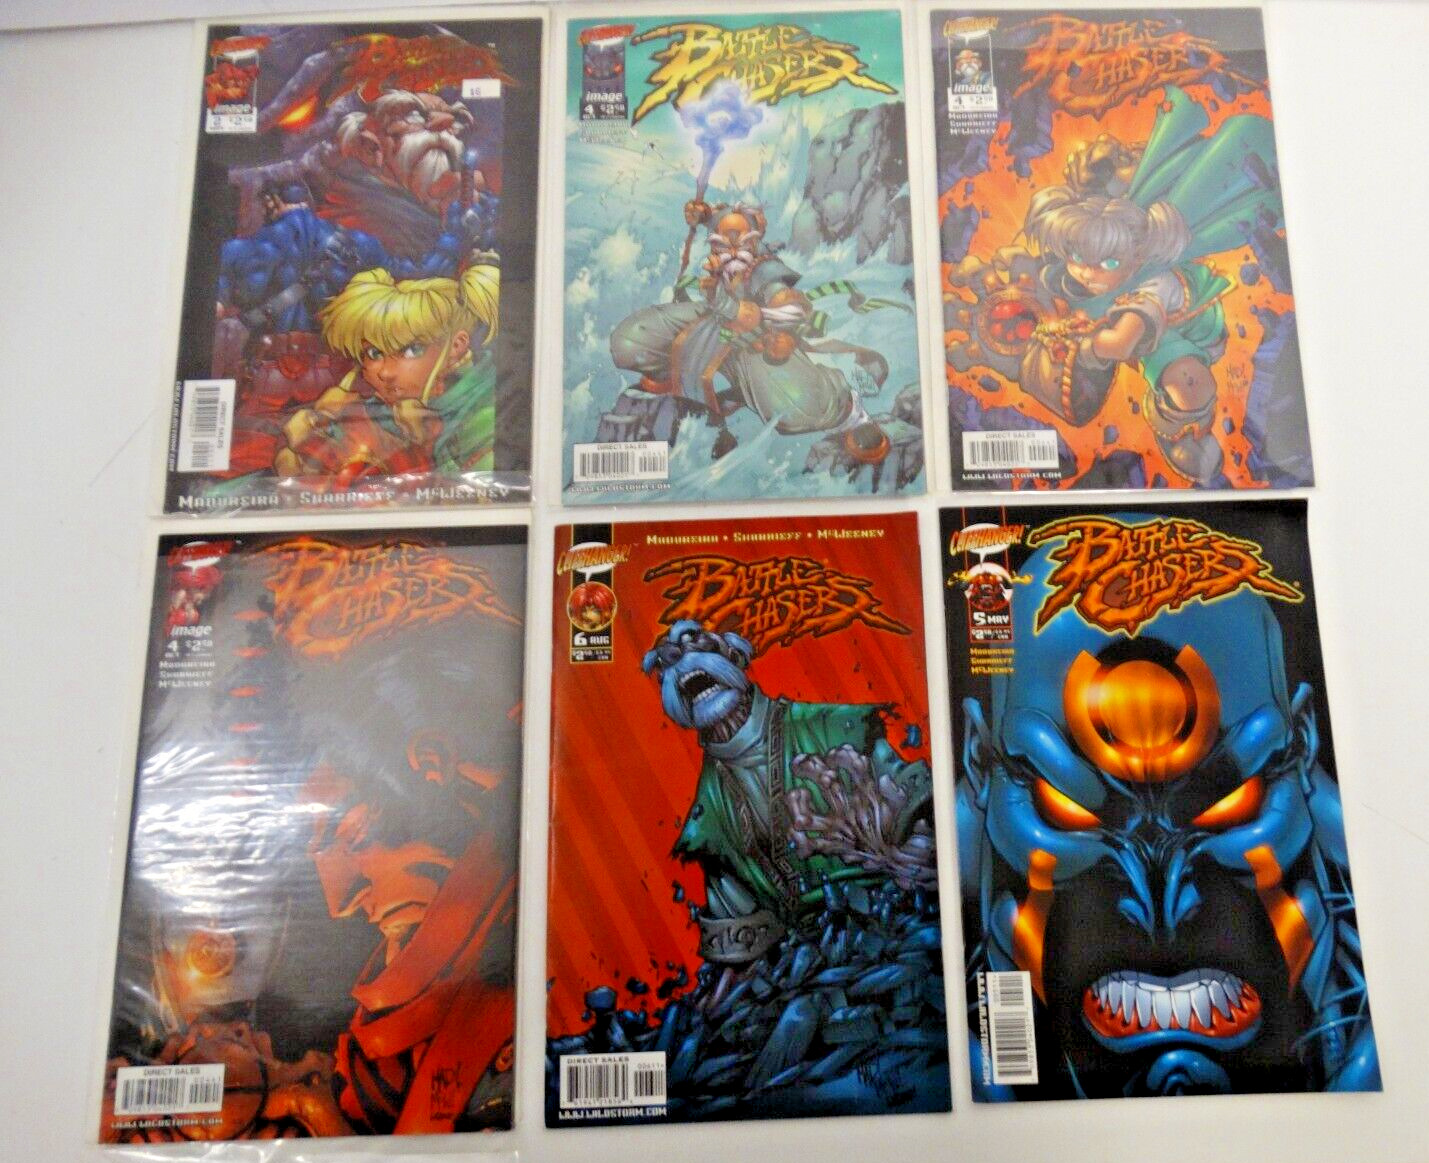 Battle Chasers Comic Book Lot of 6, Cliffhanger, Image